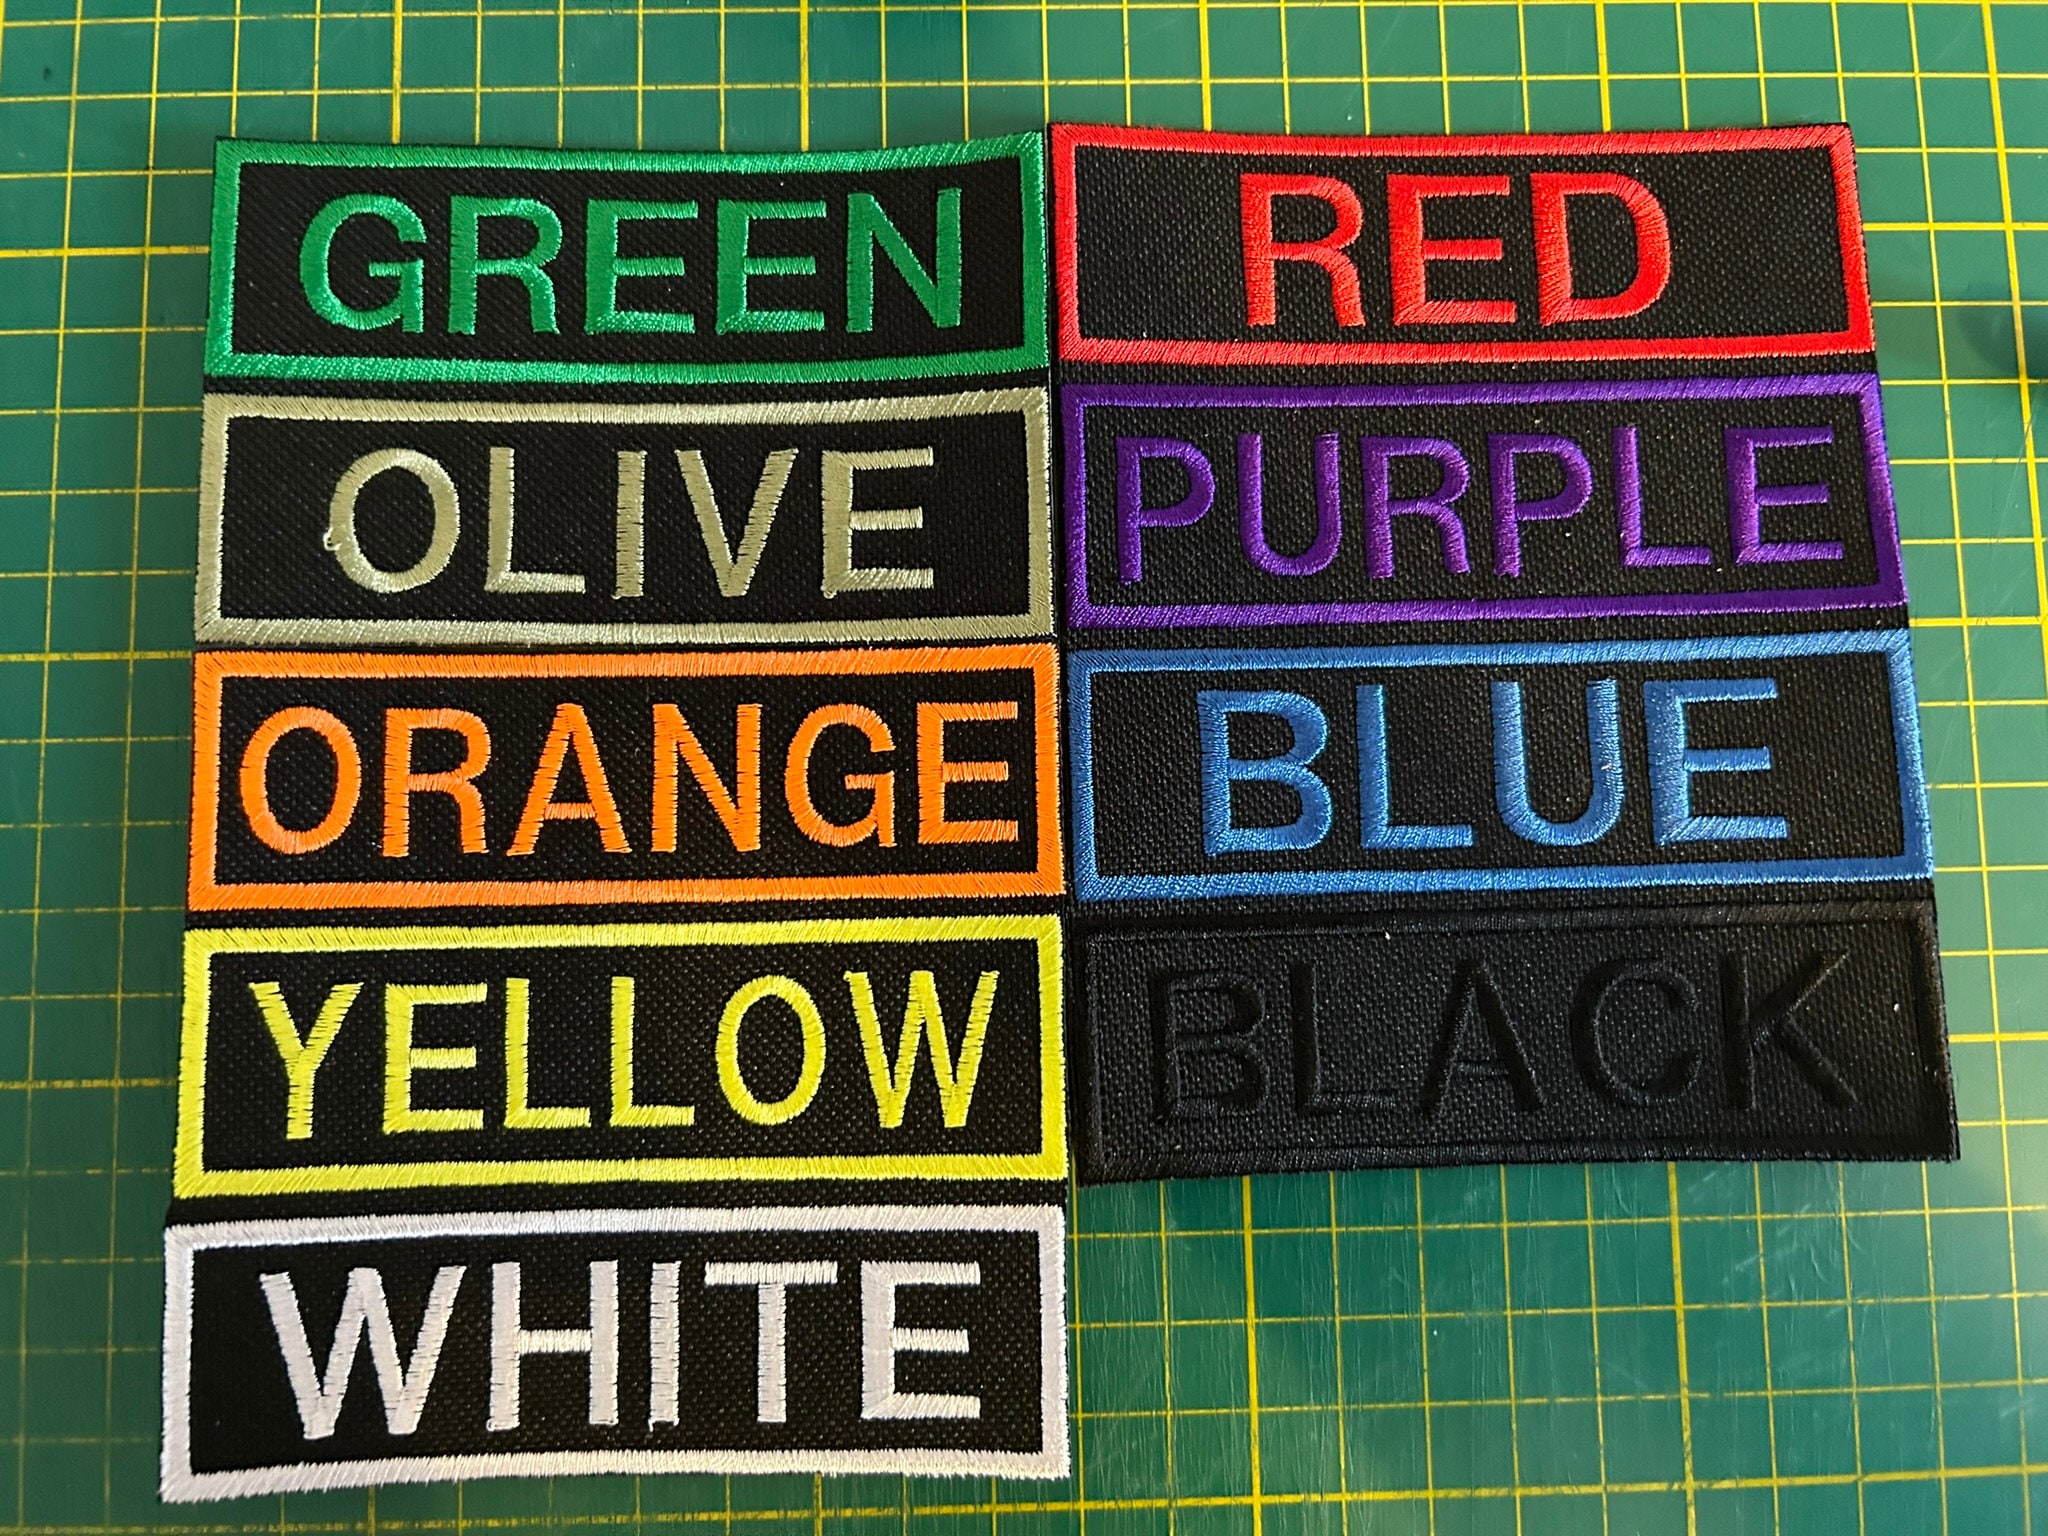 Smart Name Badge with Velcro, Various Colours, Customisable